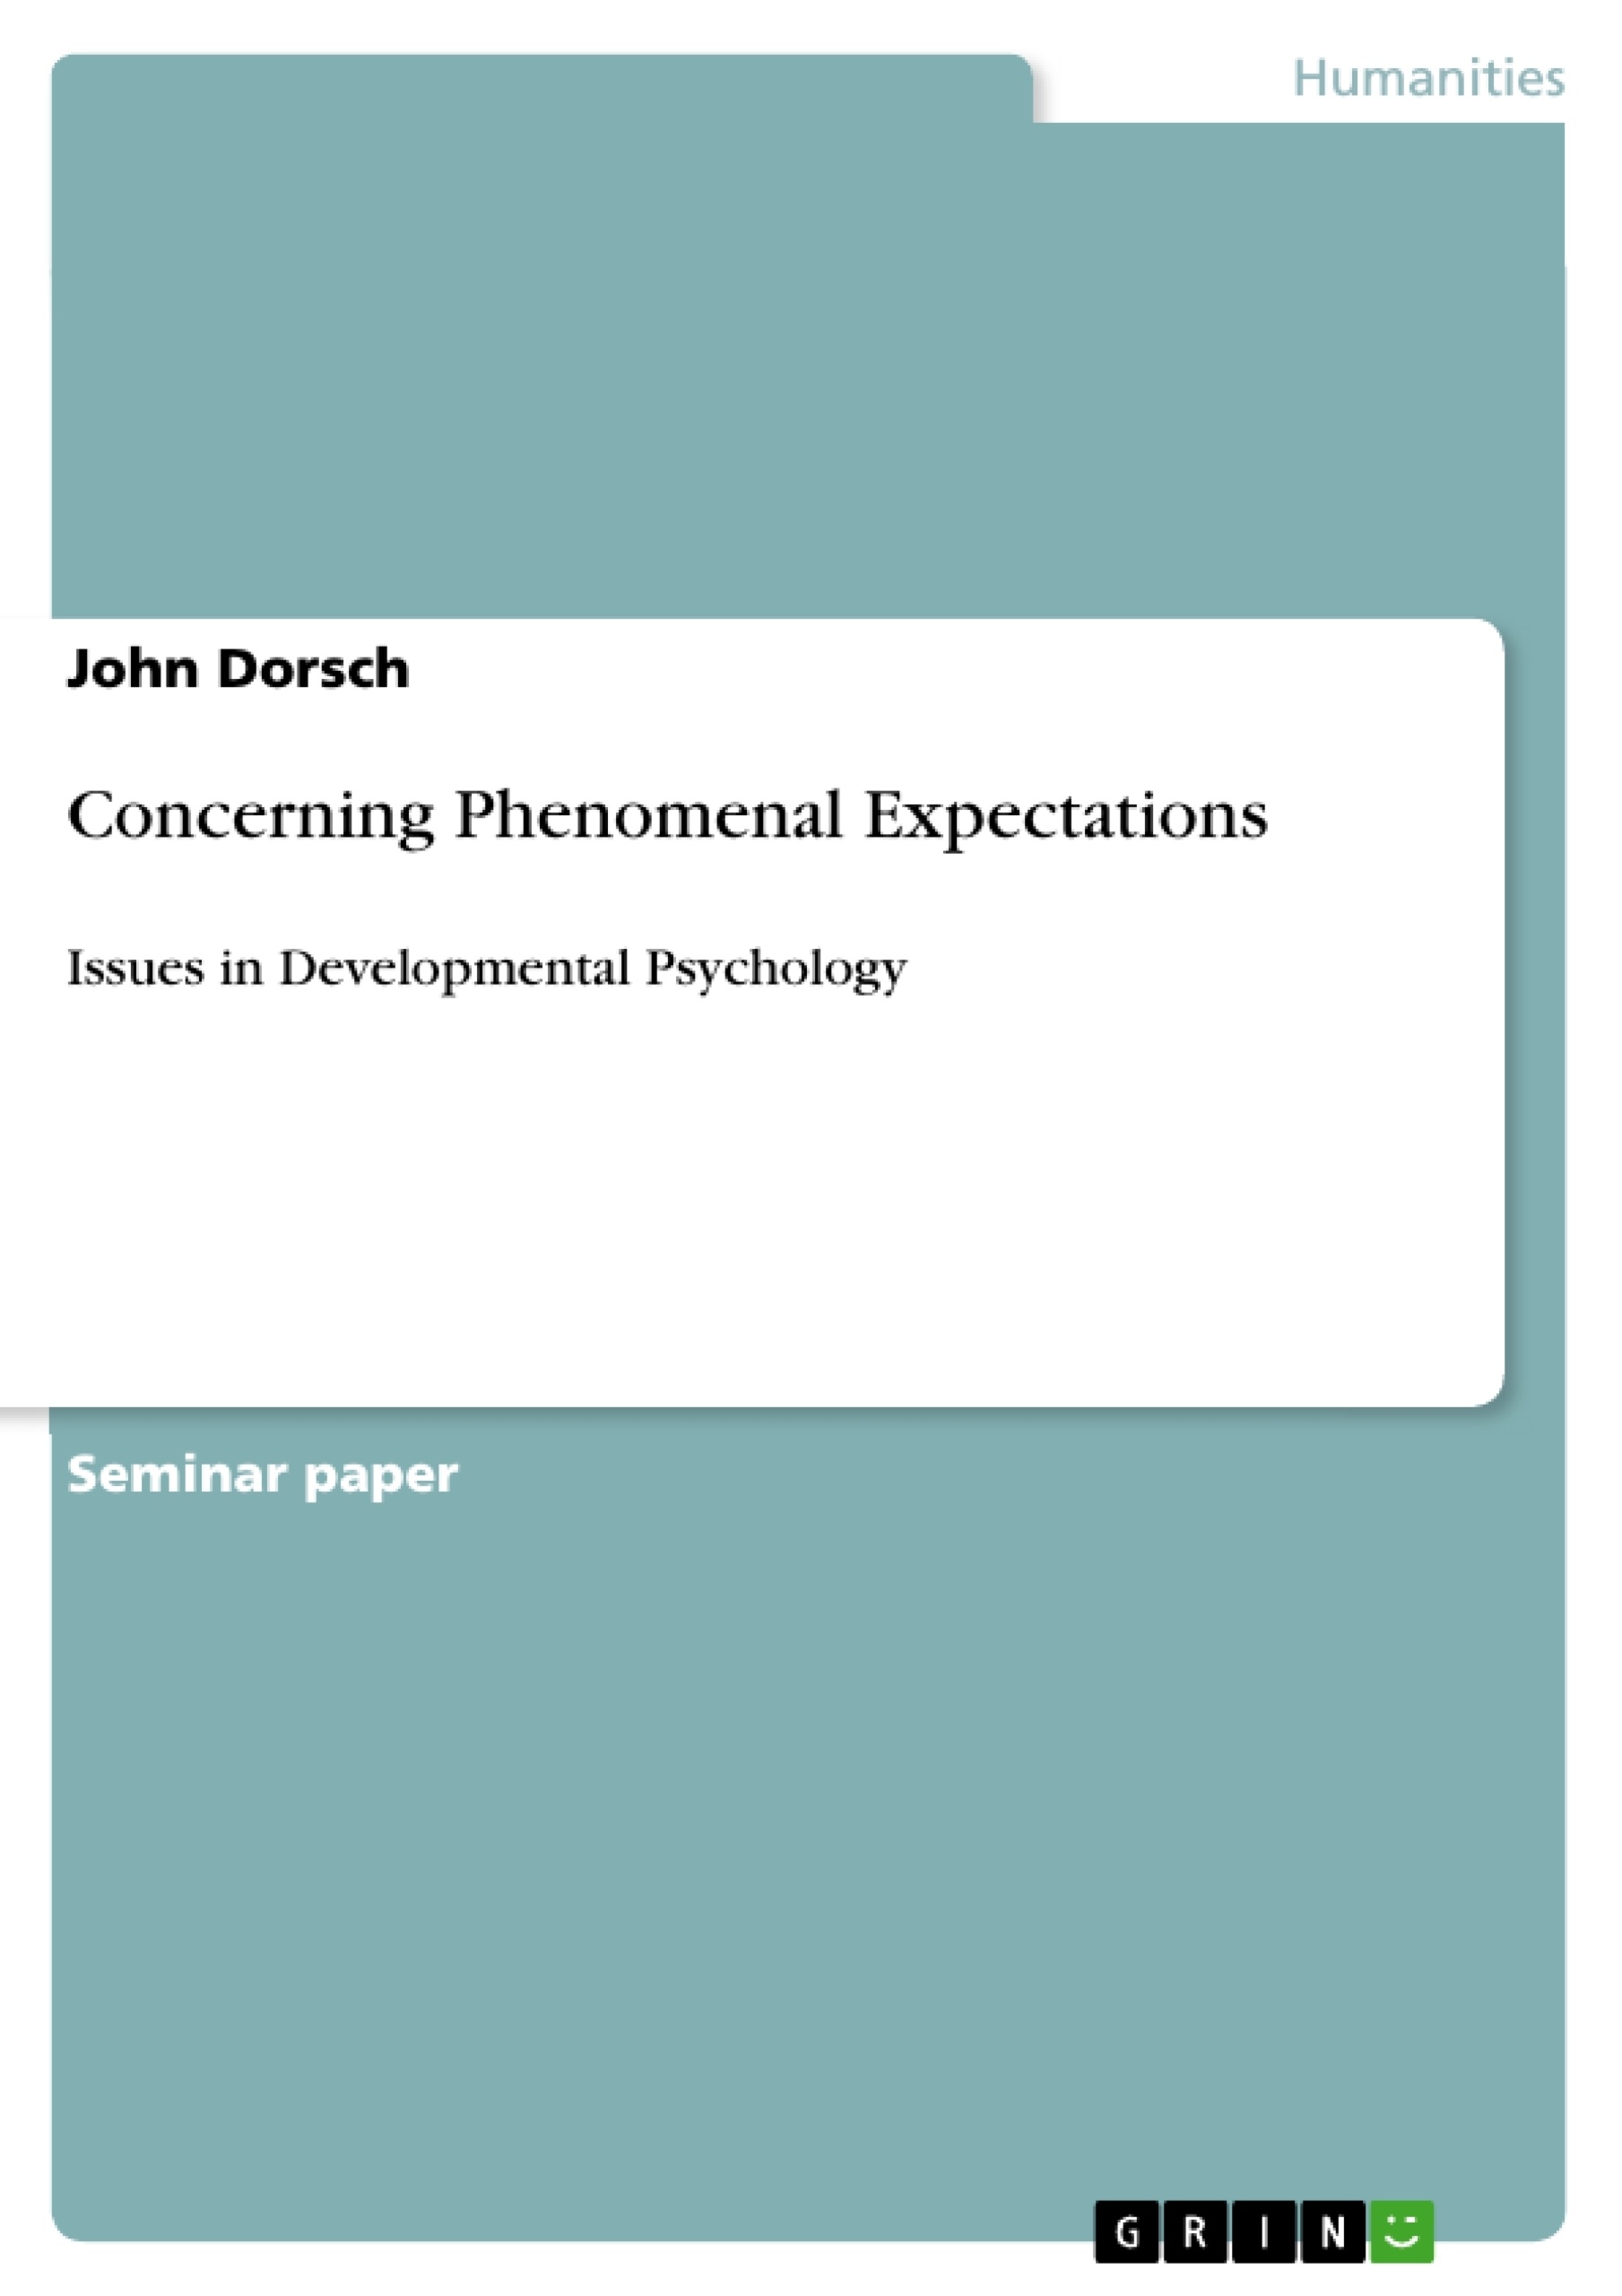 Title: Concerning Phenomenal Expectations